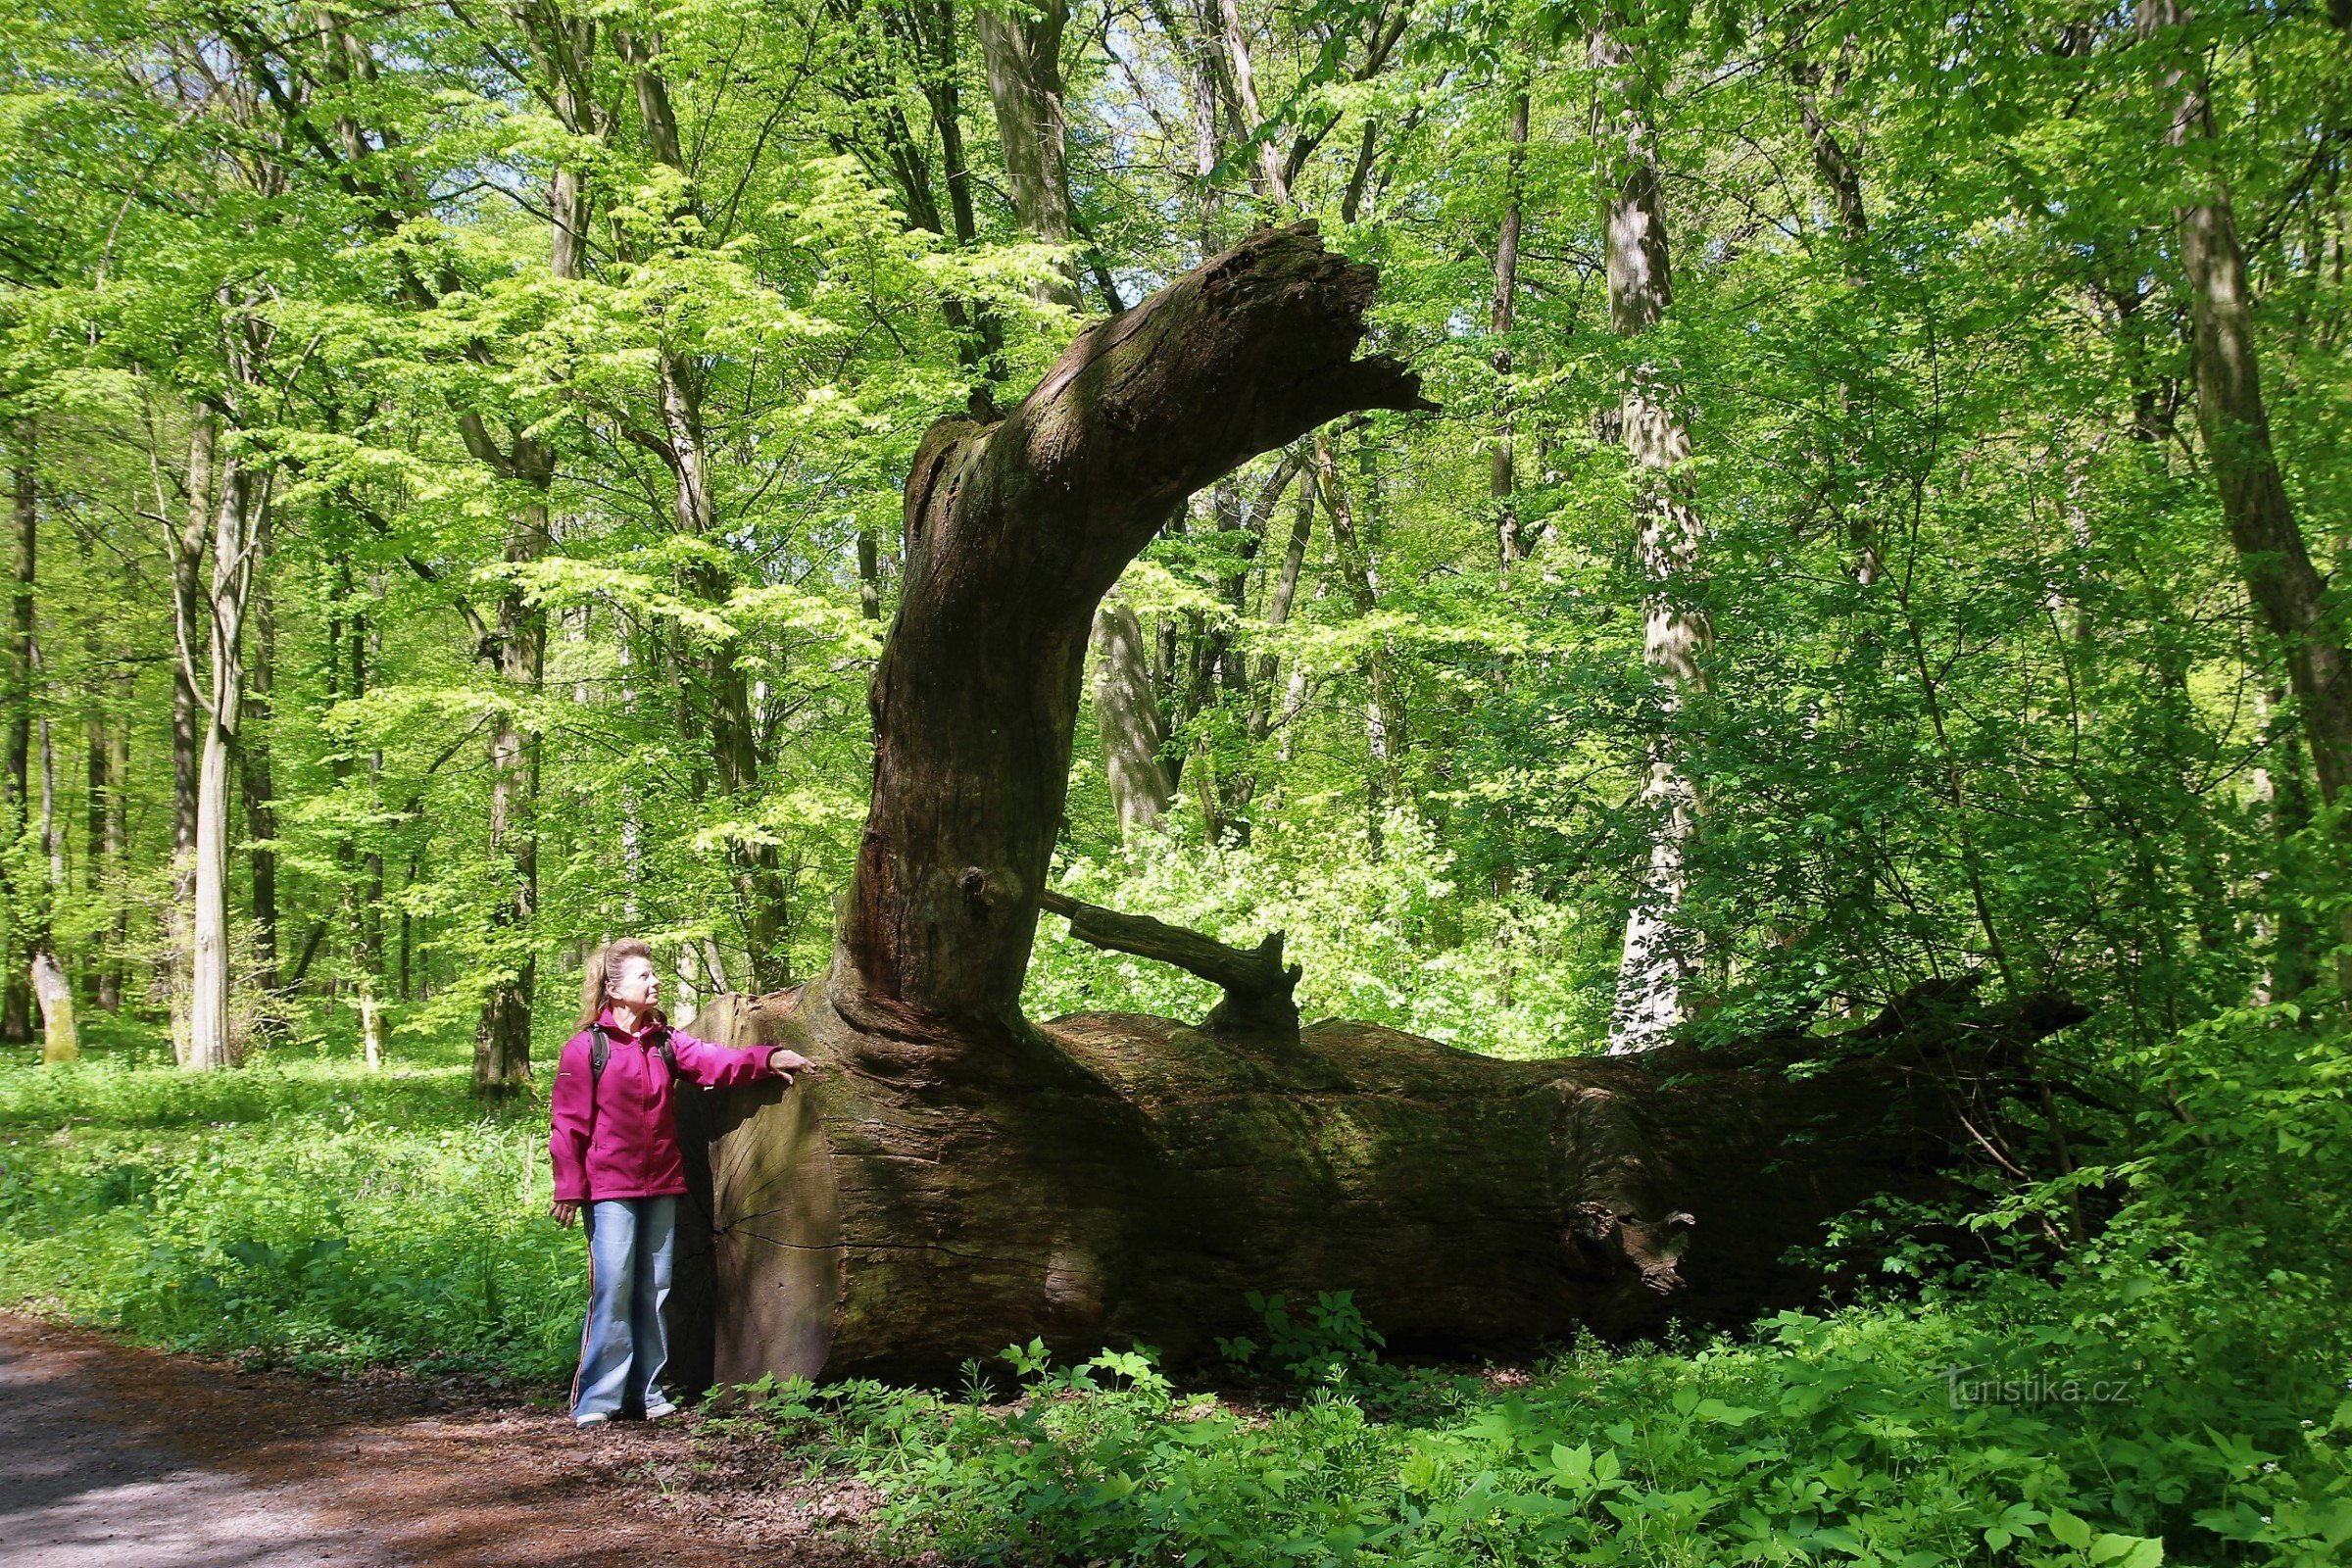 One of the fallen ancient solitaire oaks, which in the past hosted the local floodplain forest